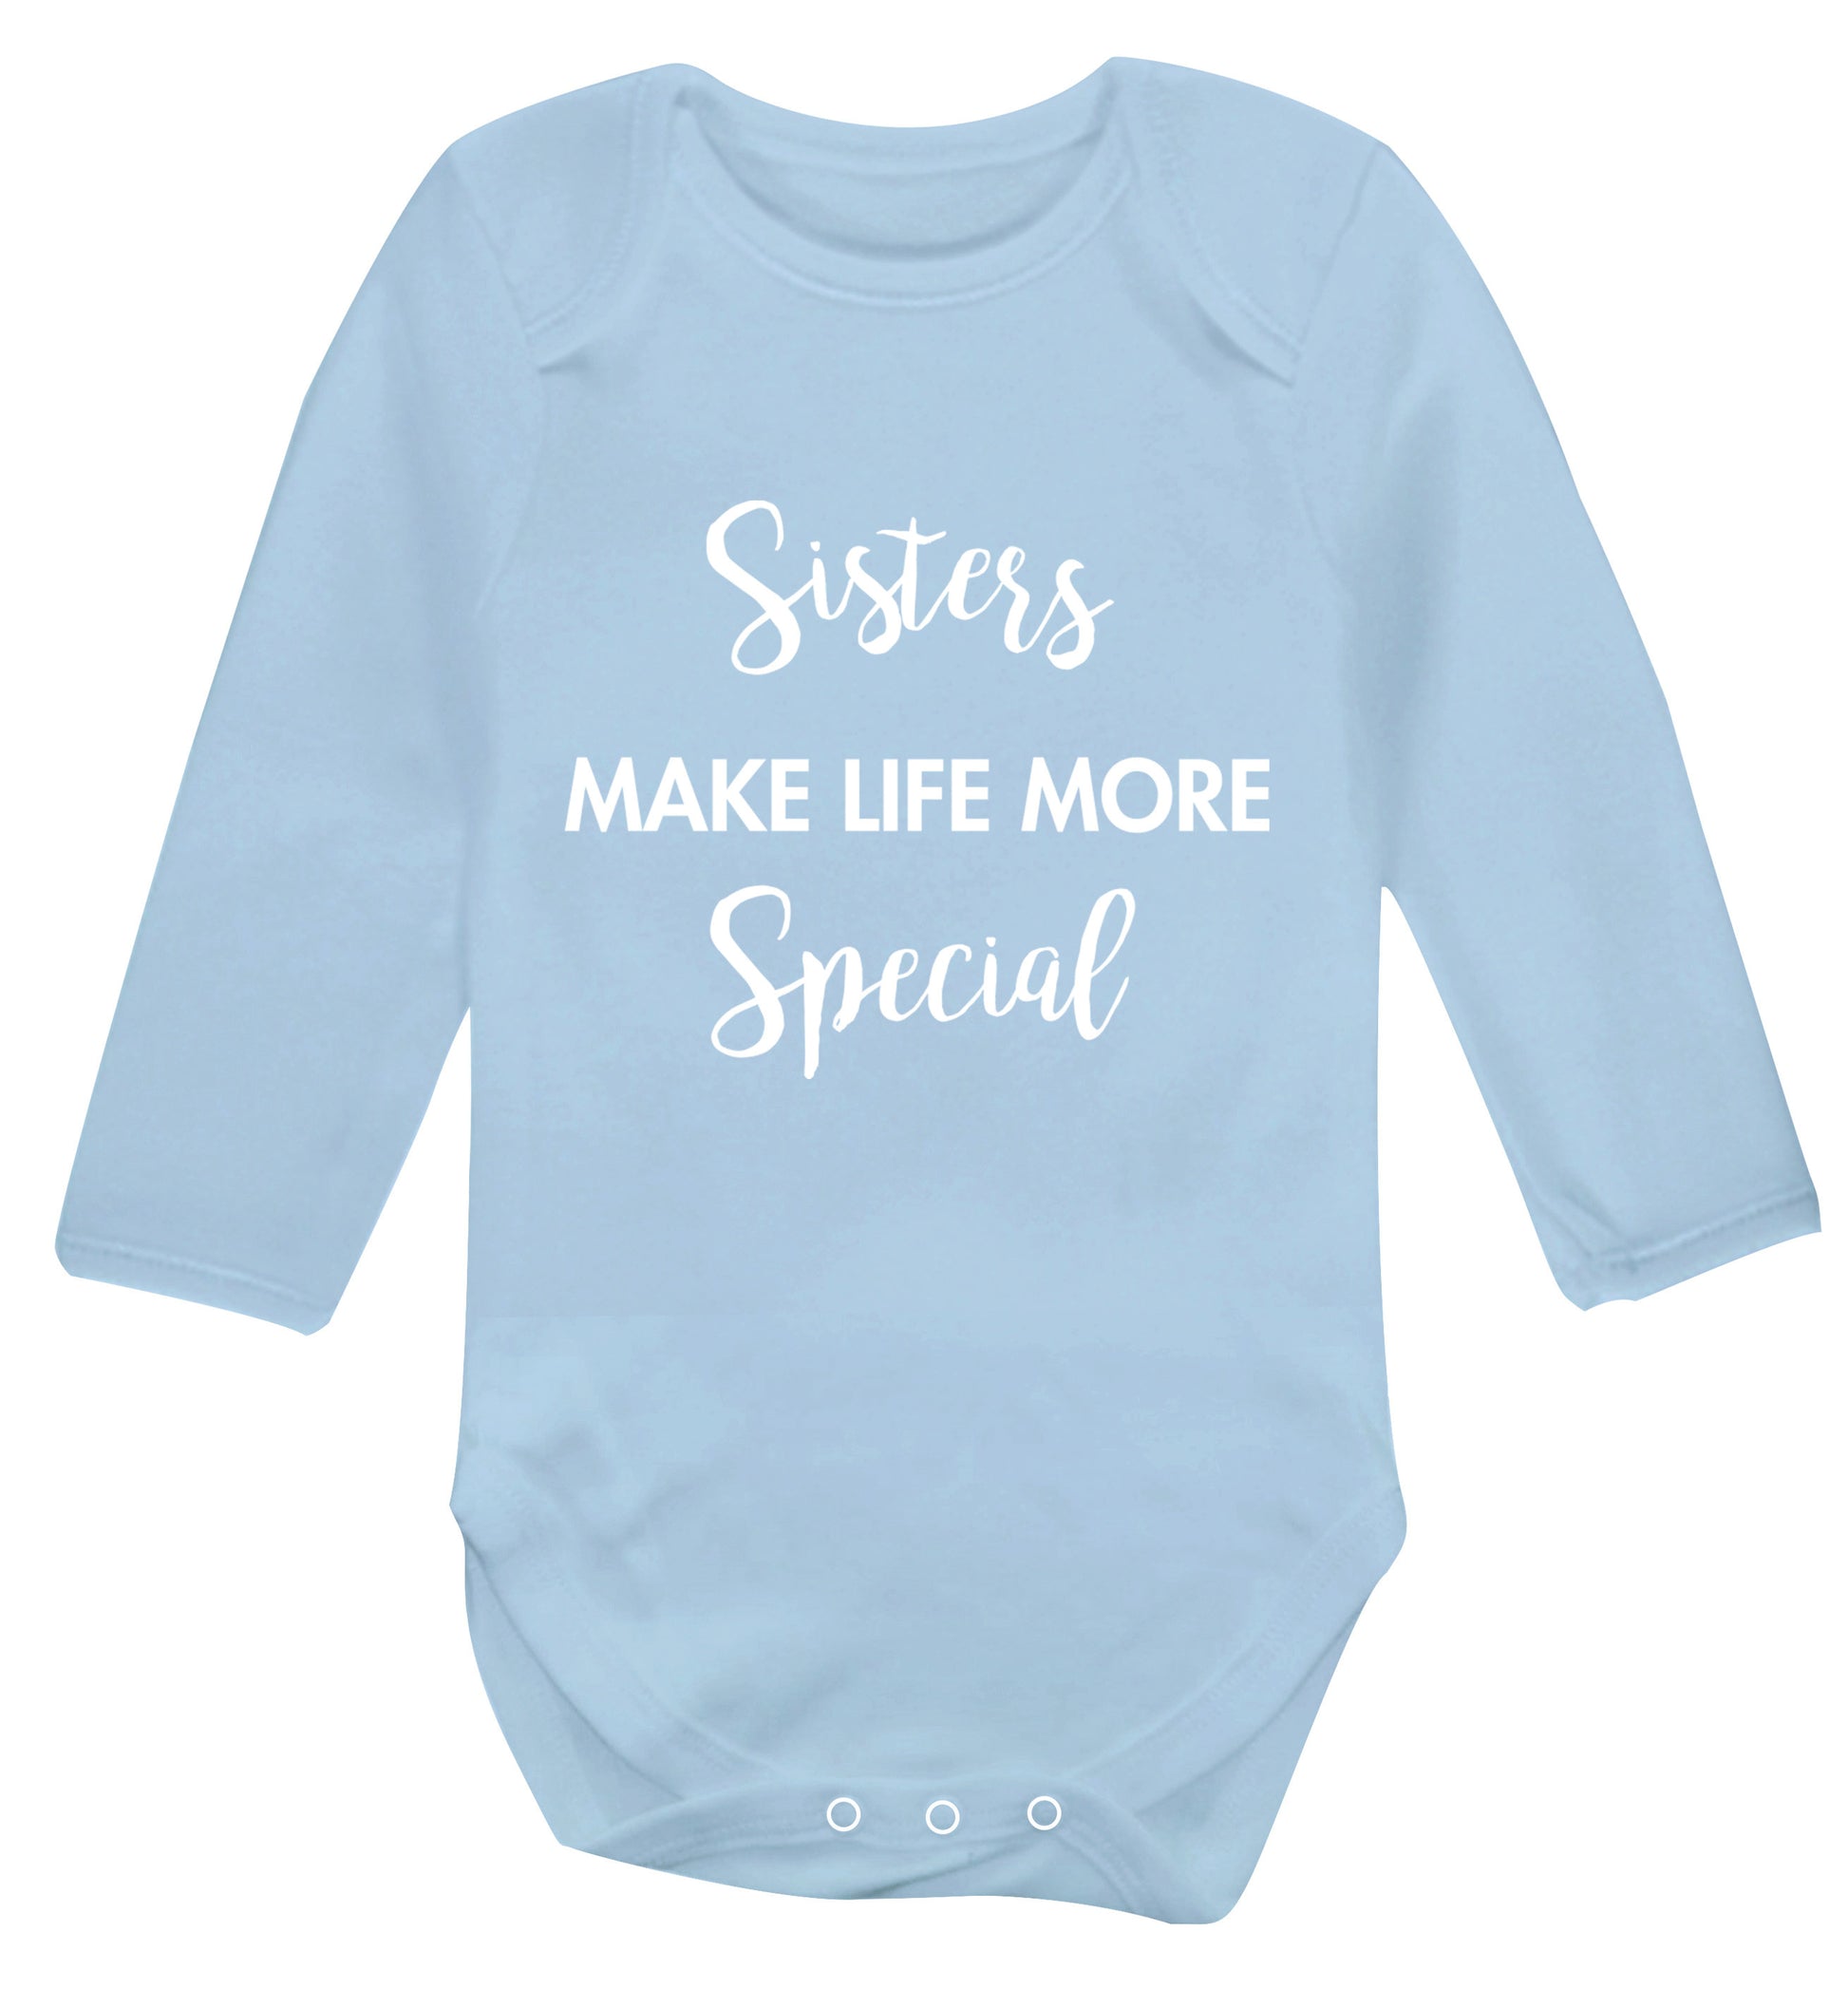 Sisters make life more special Baby Vest long sleeved pale blue 6-12 months